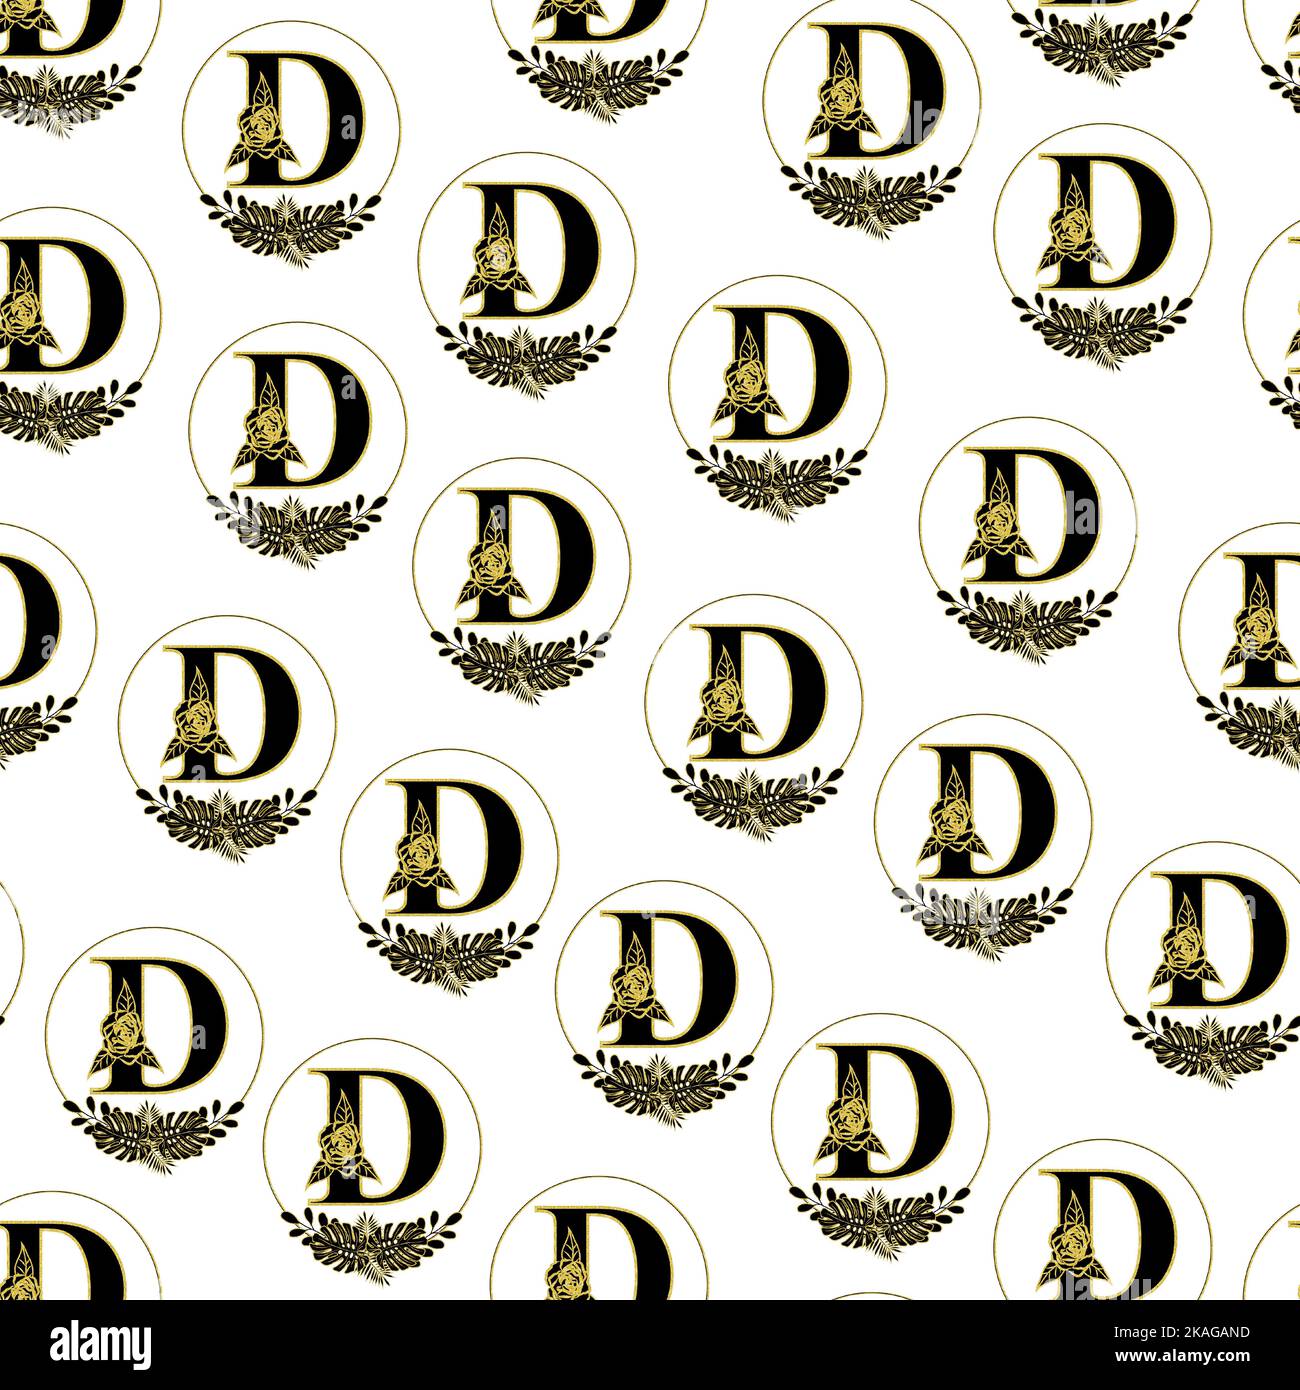 Pattern with monogram D. Repeating pattern with letter D. Seamless pattern with logo and letter D. Stock Photo